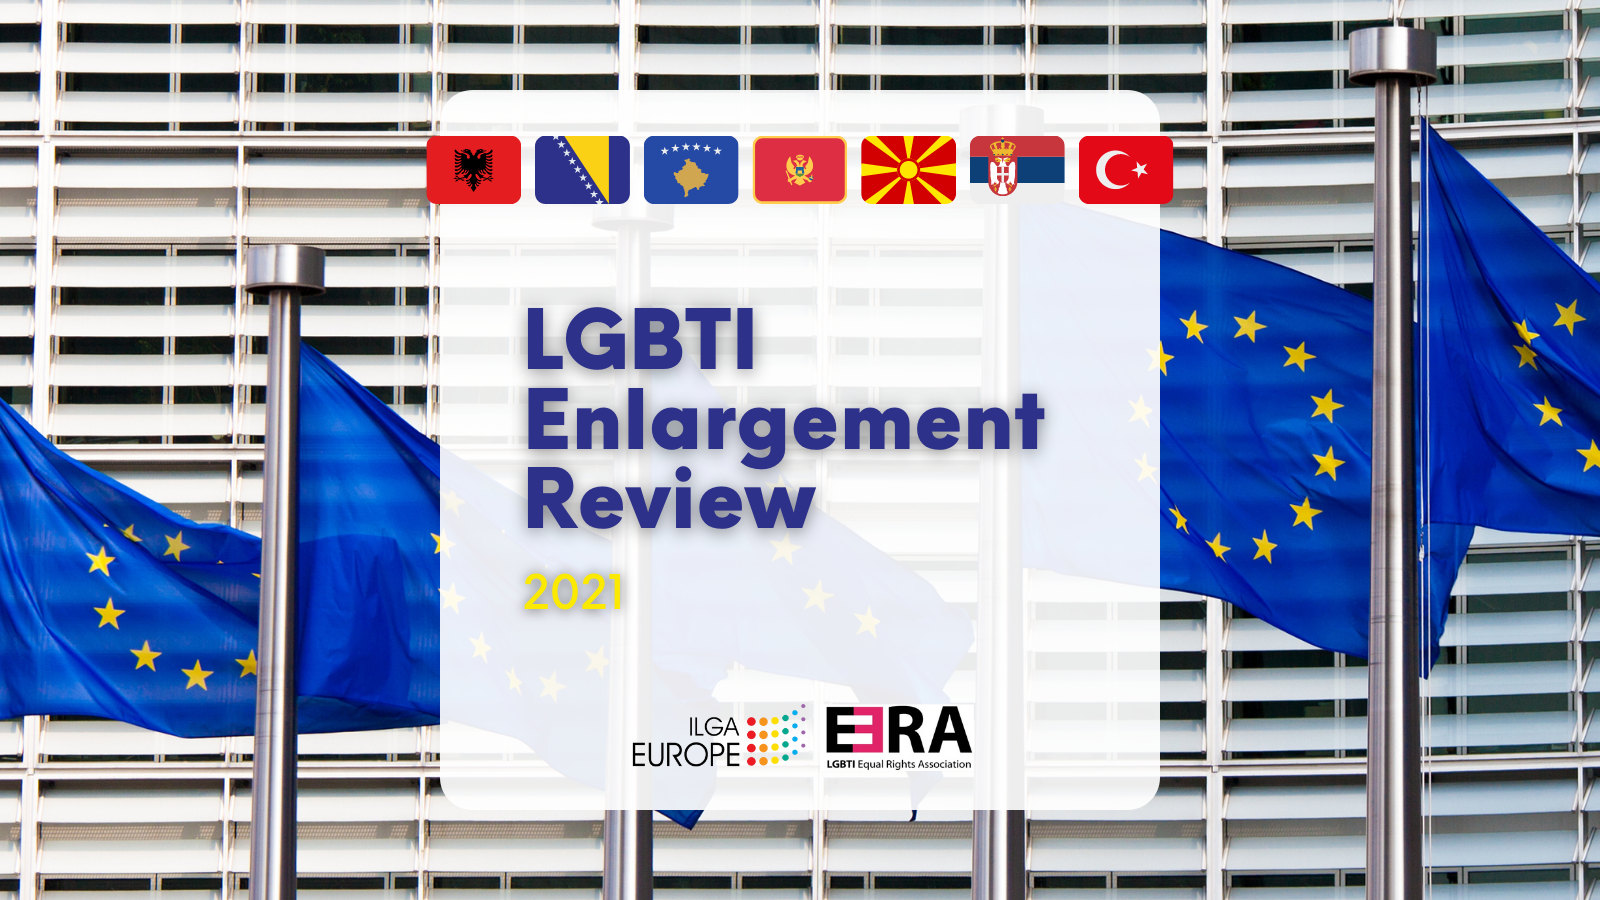 ERA - News - EU Enlargement Countries Called on to Urgently Ensure Protection of the Human Rights of LGBTI People